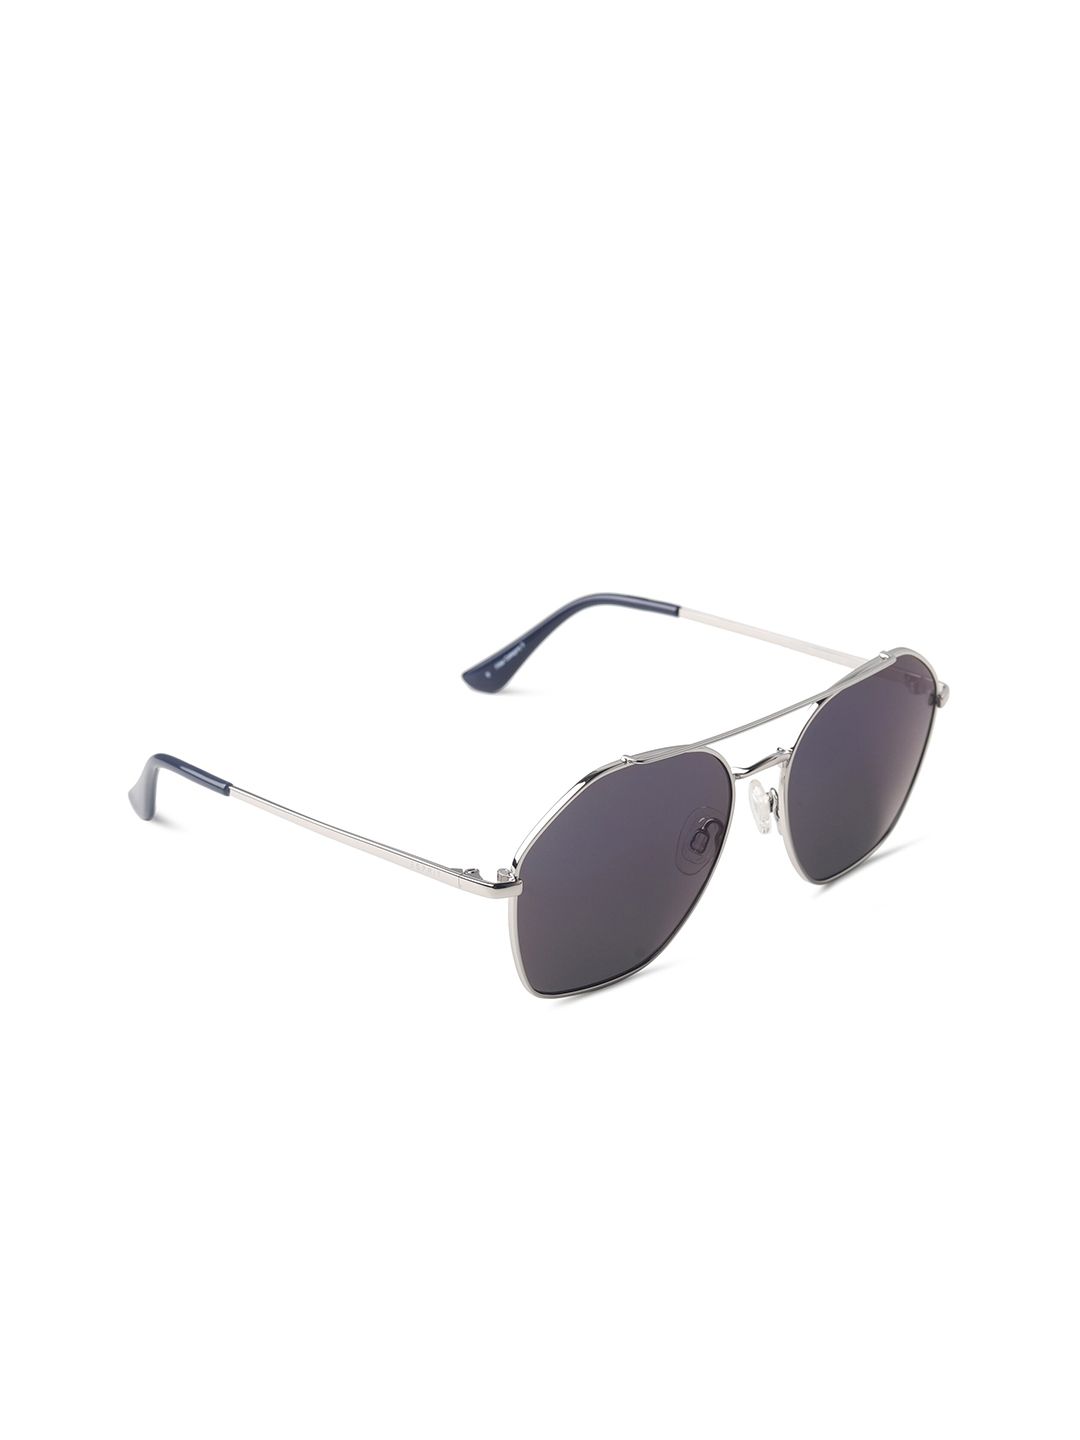 ESPRIT Women Grey Lens & Steel-Toned Other Sunglasses with UV Protected Lens Price in India